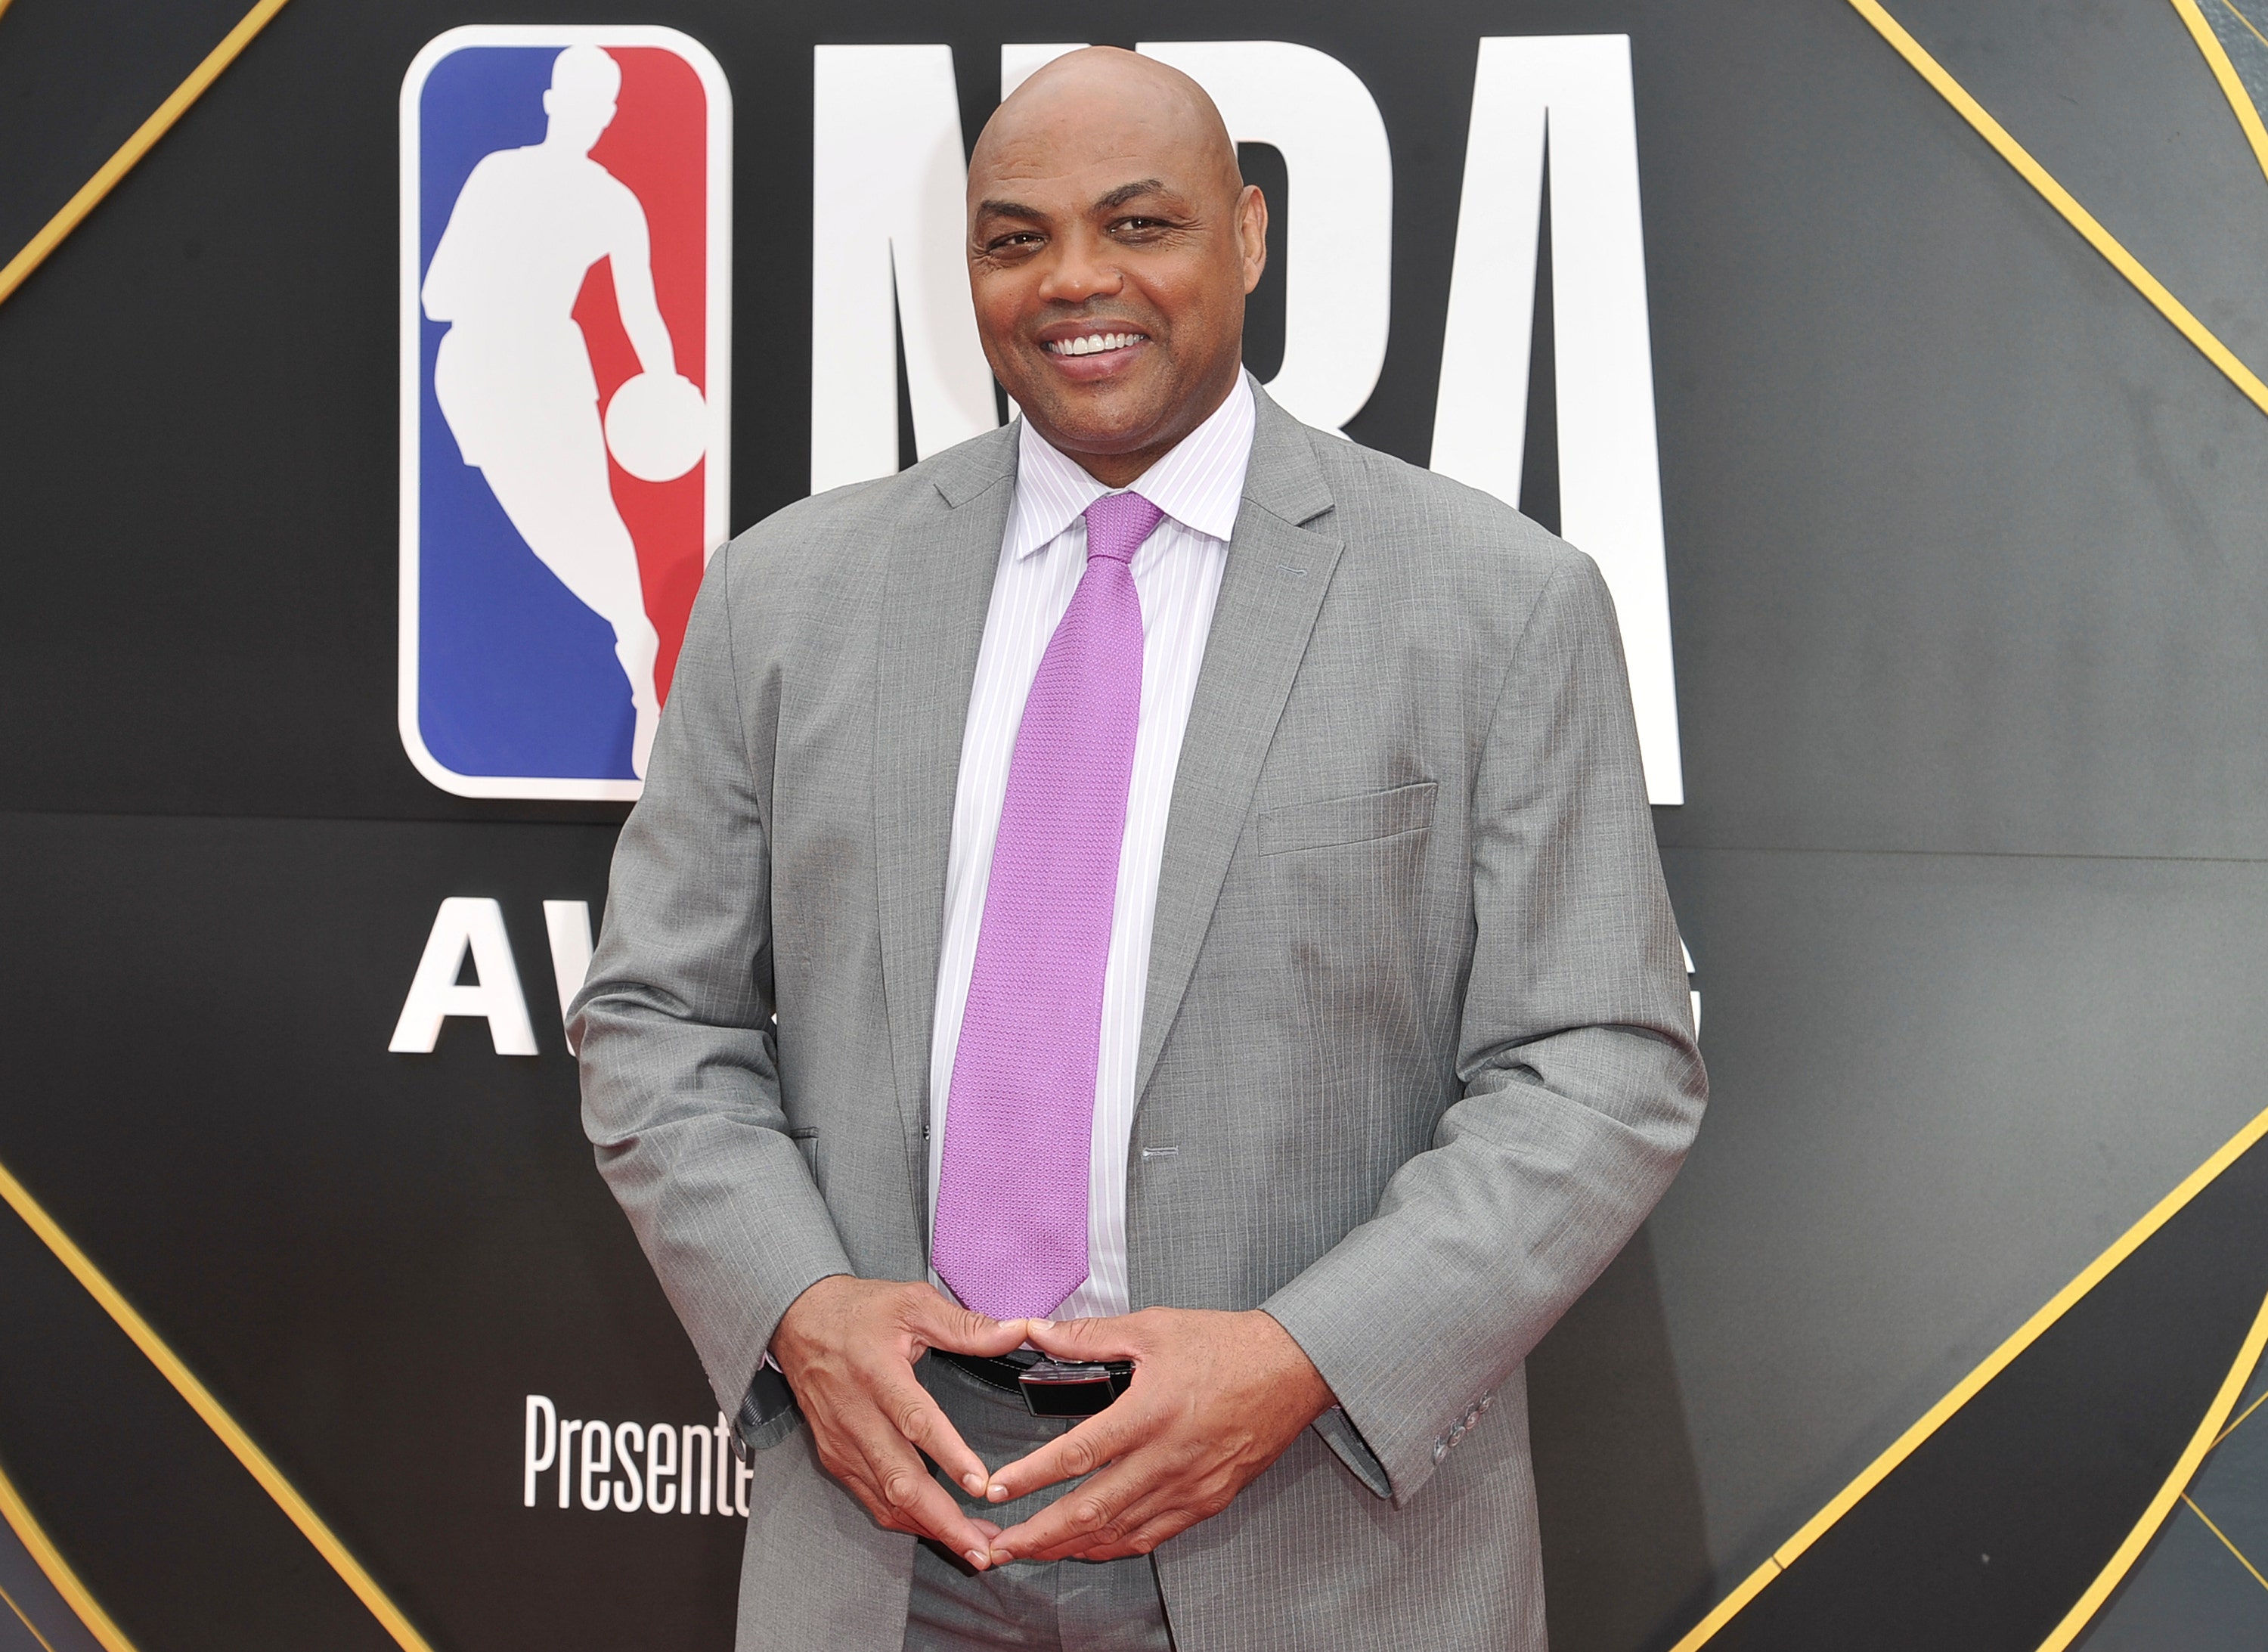 Charles Barkley on Kevin Durant joining the Suns: ‘He should lead that team’ – Fox News